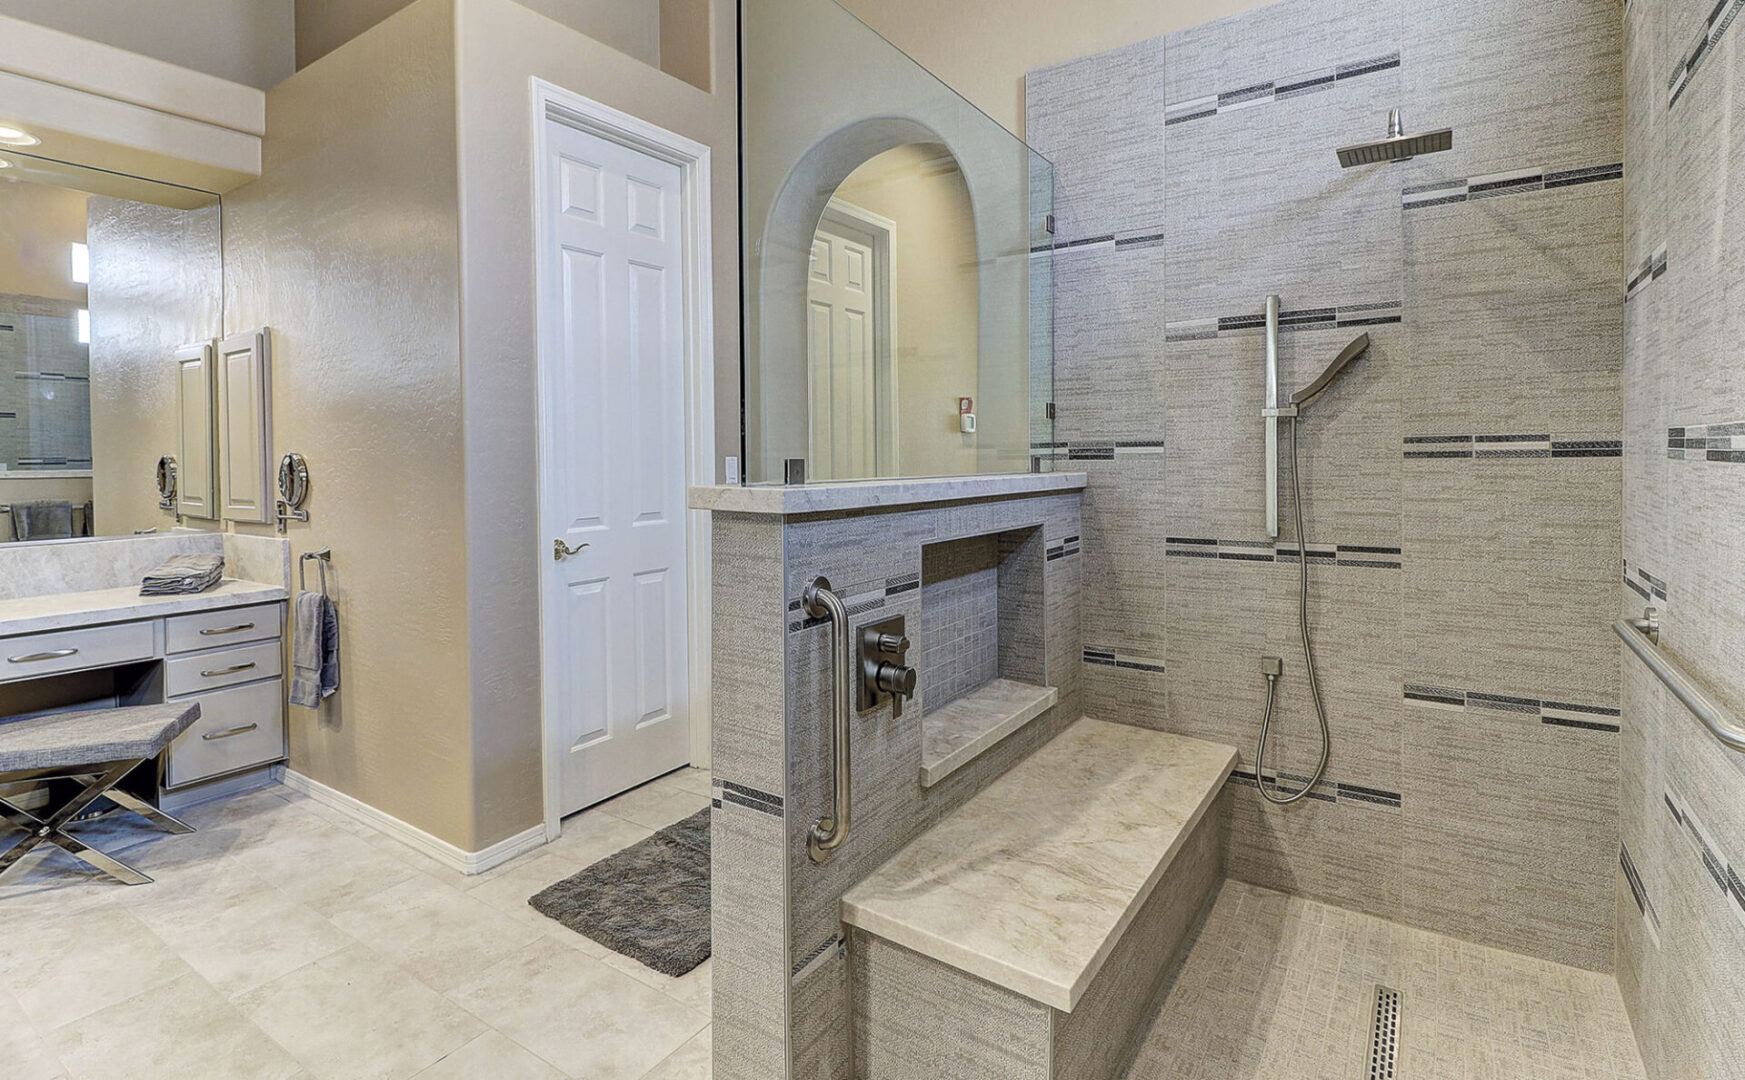 Inside image of a bathroom along with beautiful interior